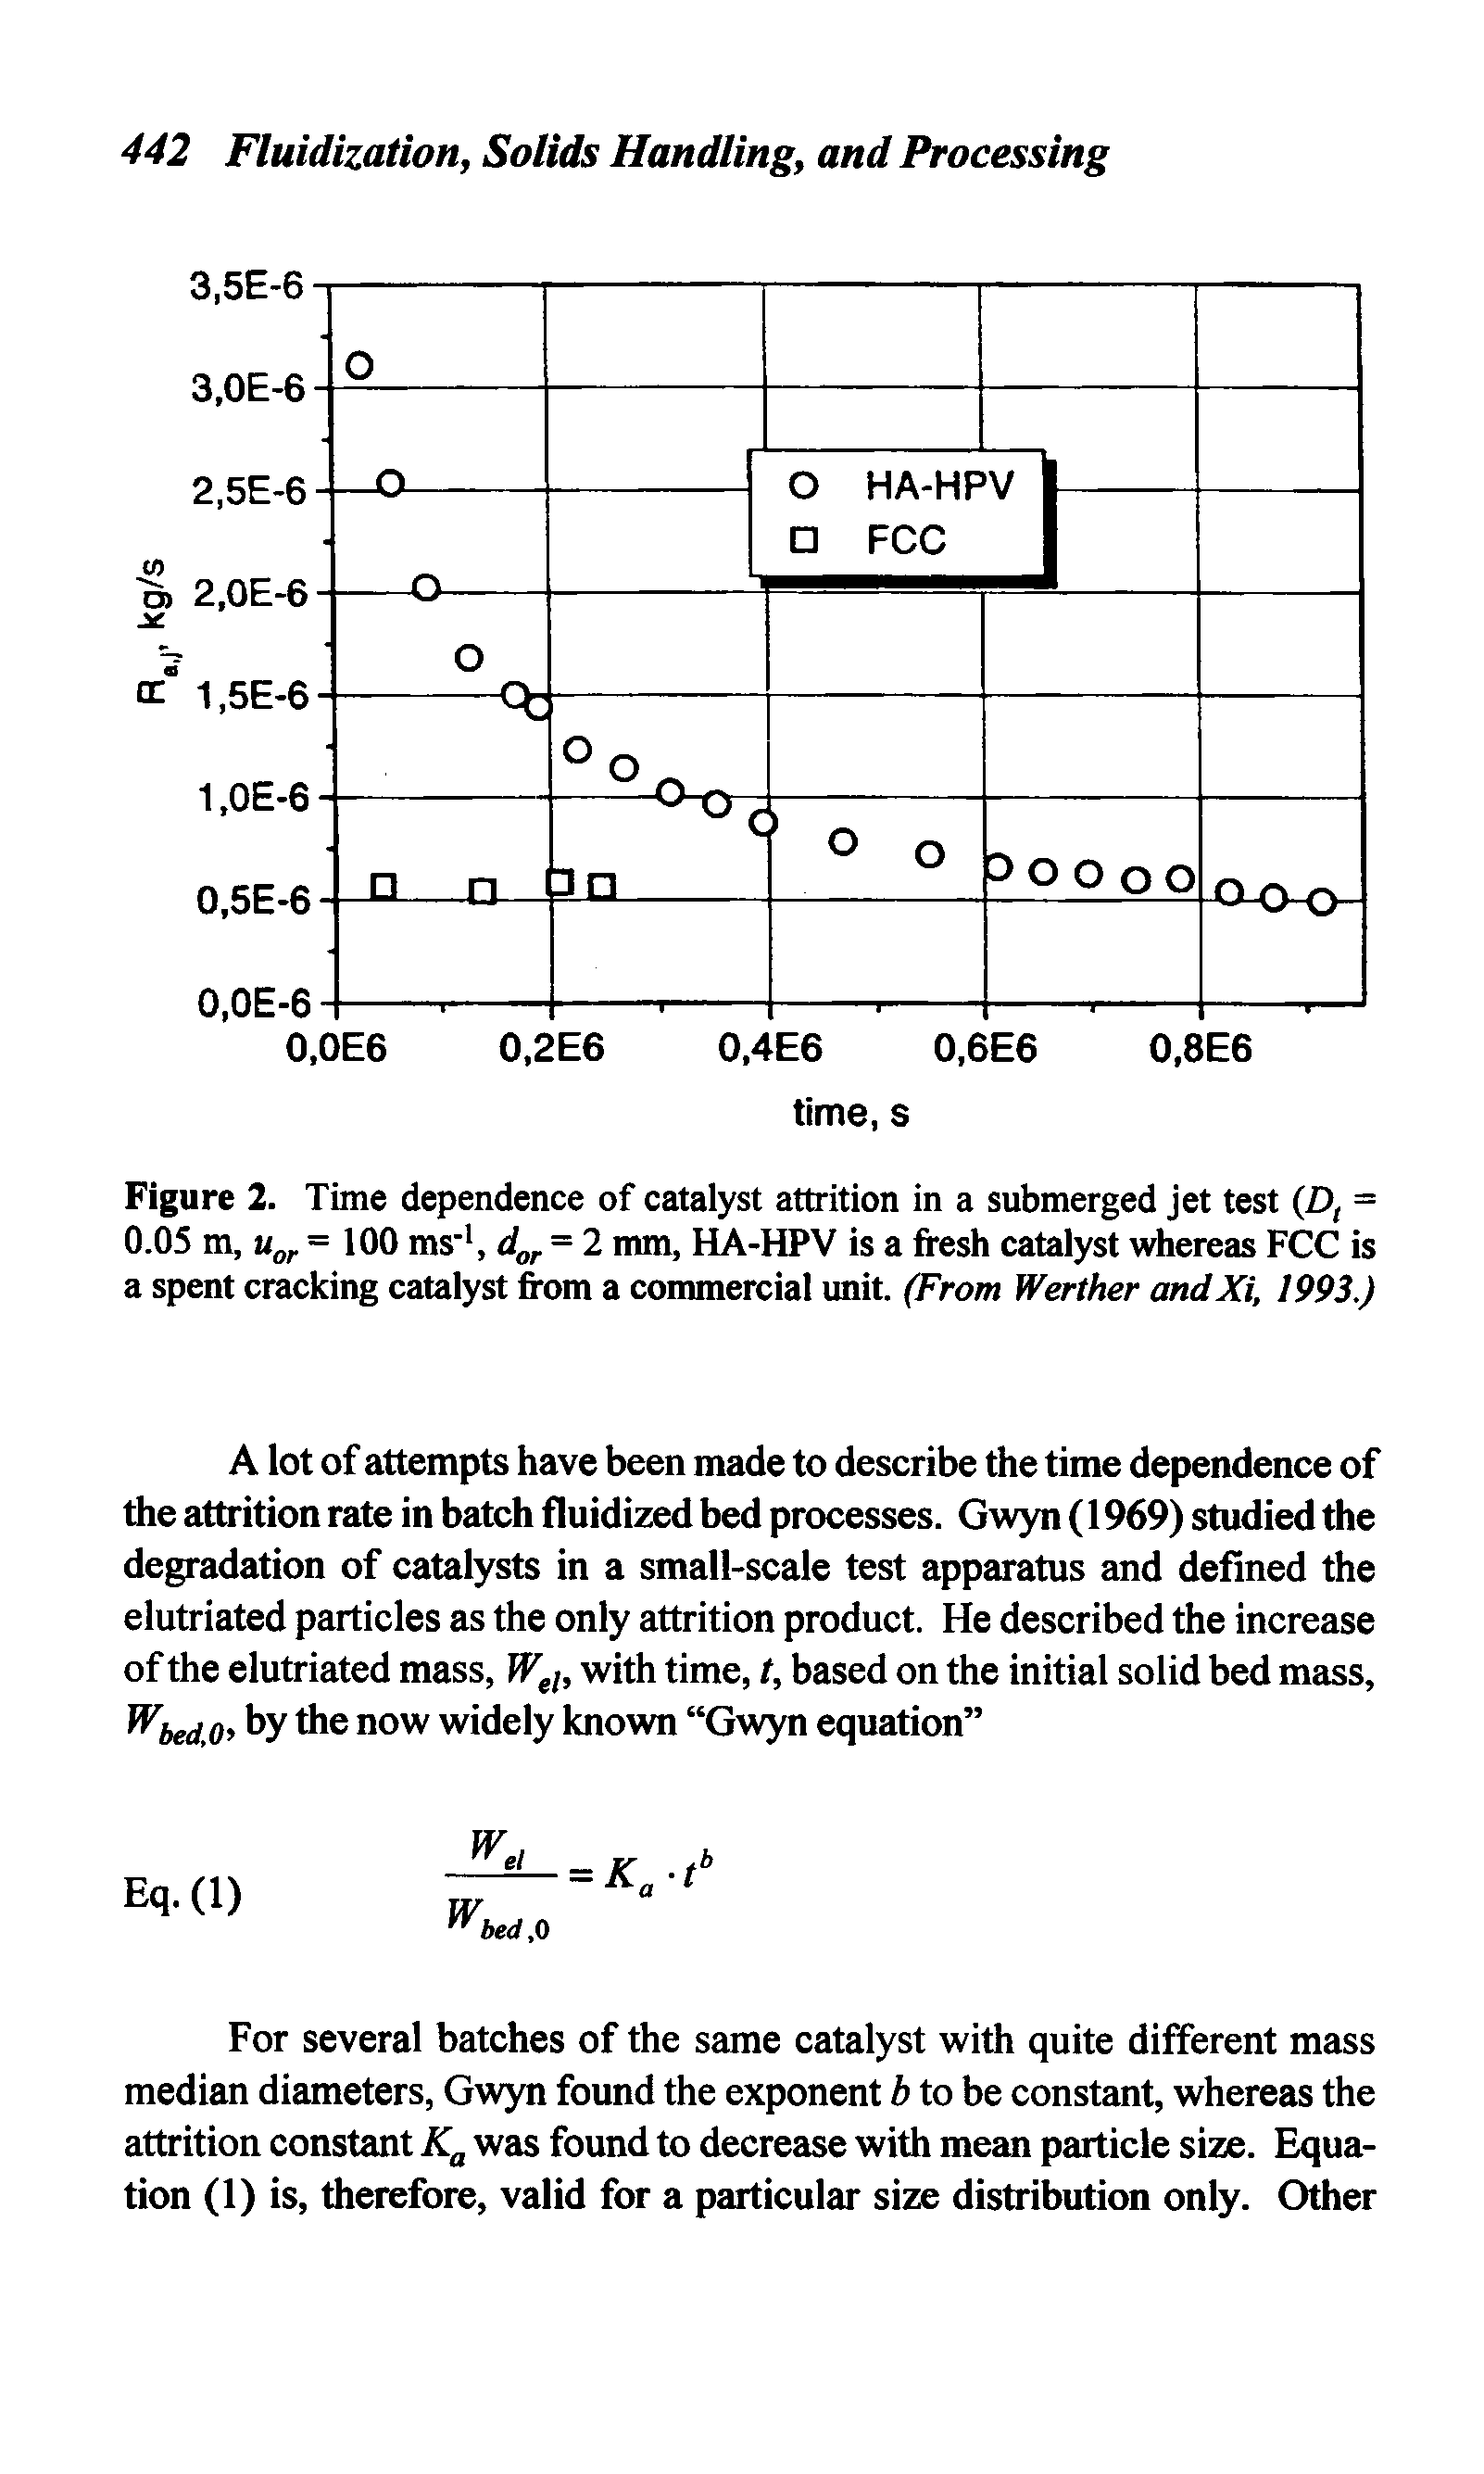 Figure 2. Time dependence of catalyst attrition in a submerged jet test (D, = 0.05 m, uor = 100 ms-1, dor = 2 mm, HA-HPV is a fresh catalyst whereas FCC is a spent cracking catalyst from a commercial unit. (From Werther and Xi, 1993.)...